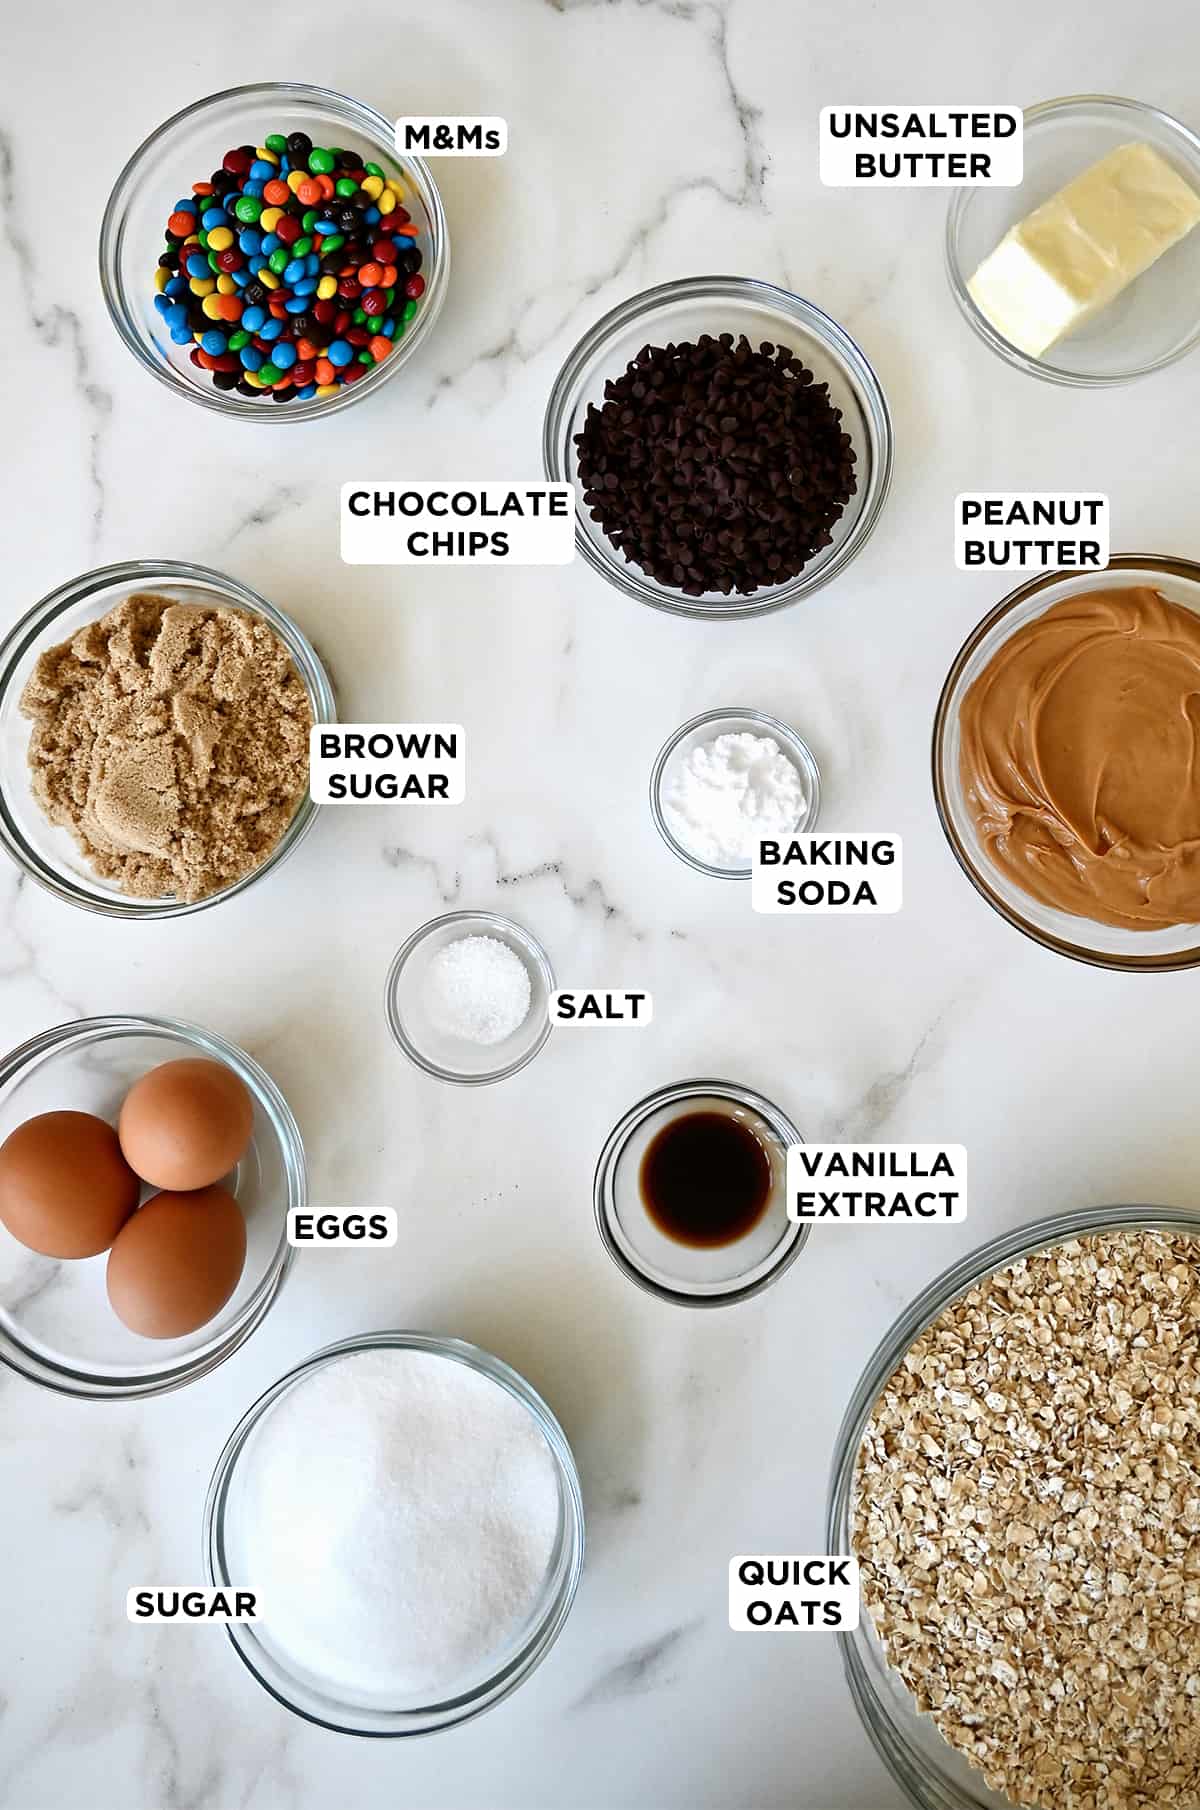 Glass bowls containing ingredients to make monster cookie bars, including M&Ms, chocolate chips, baking soda, white and brown sugars, vanilla extract, peanut butter, eggs and old-fashioned oats.